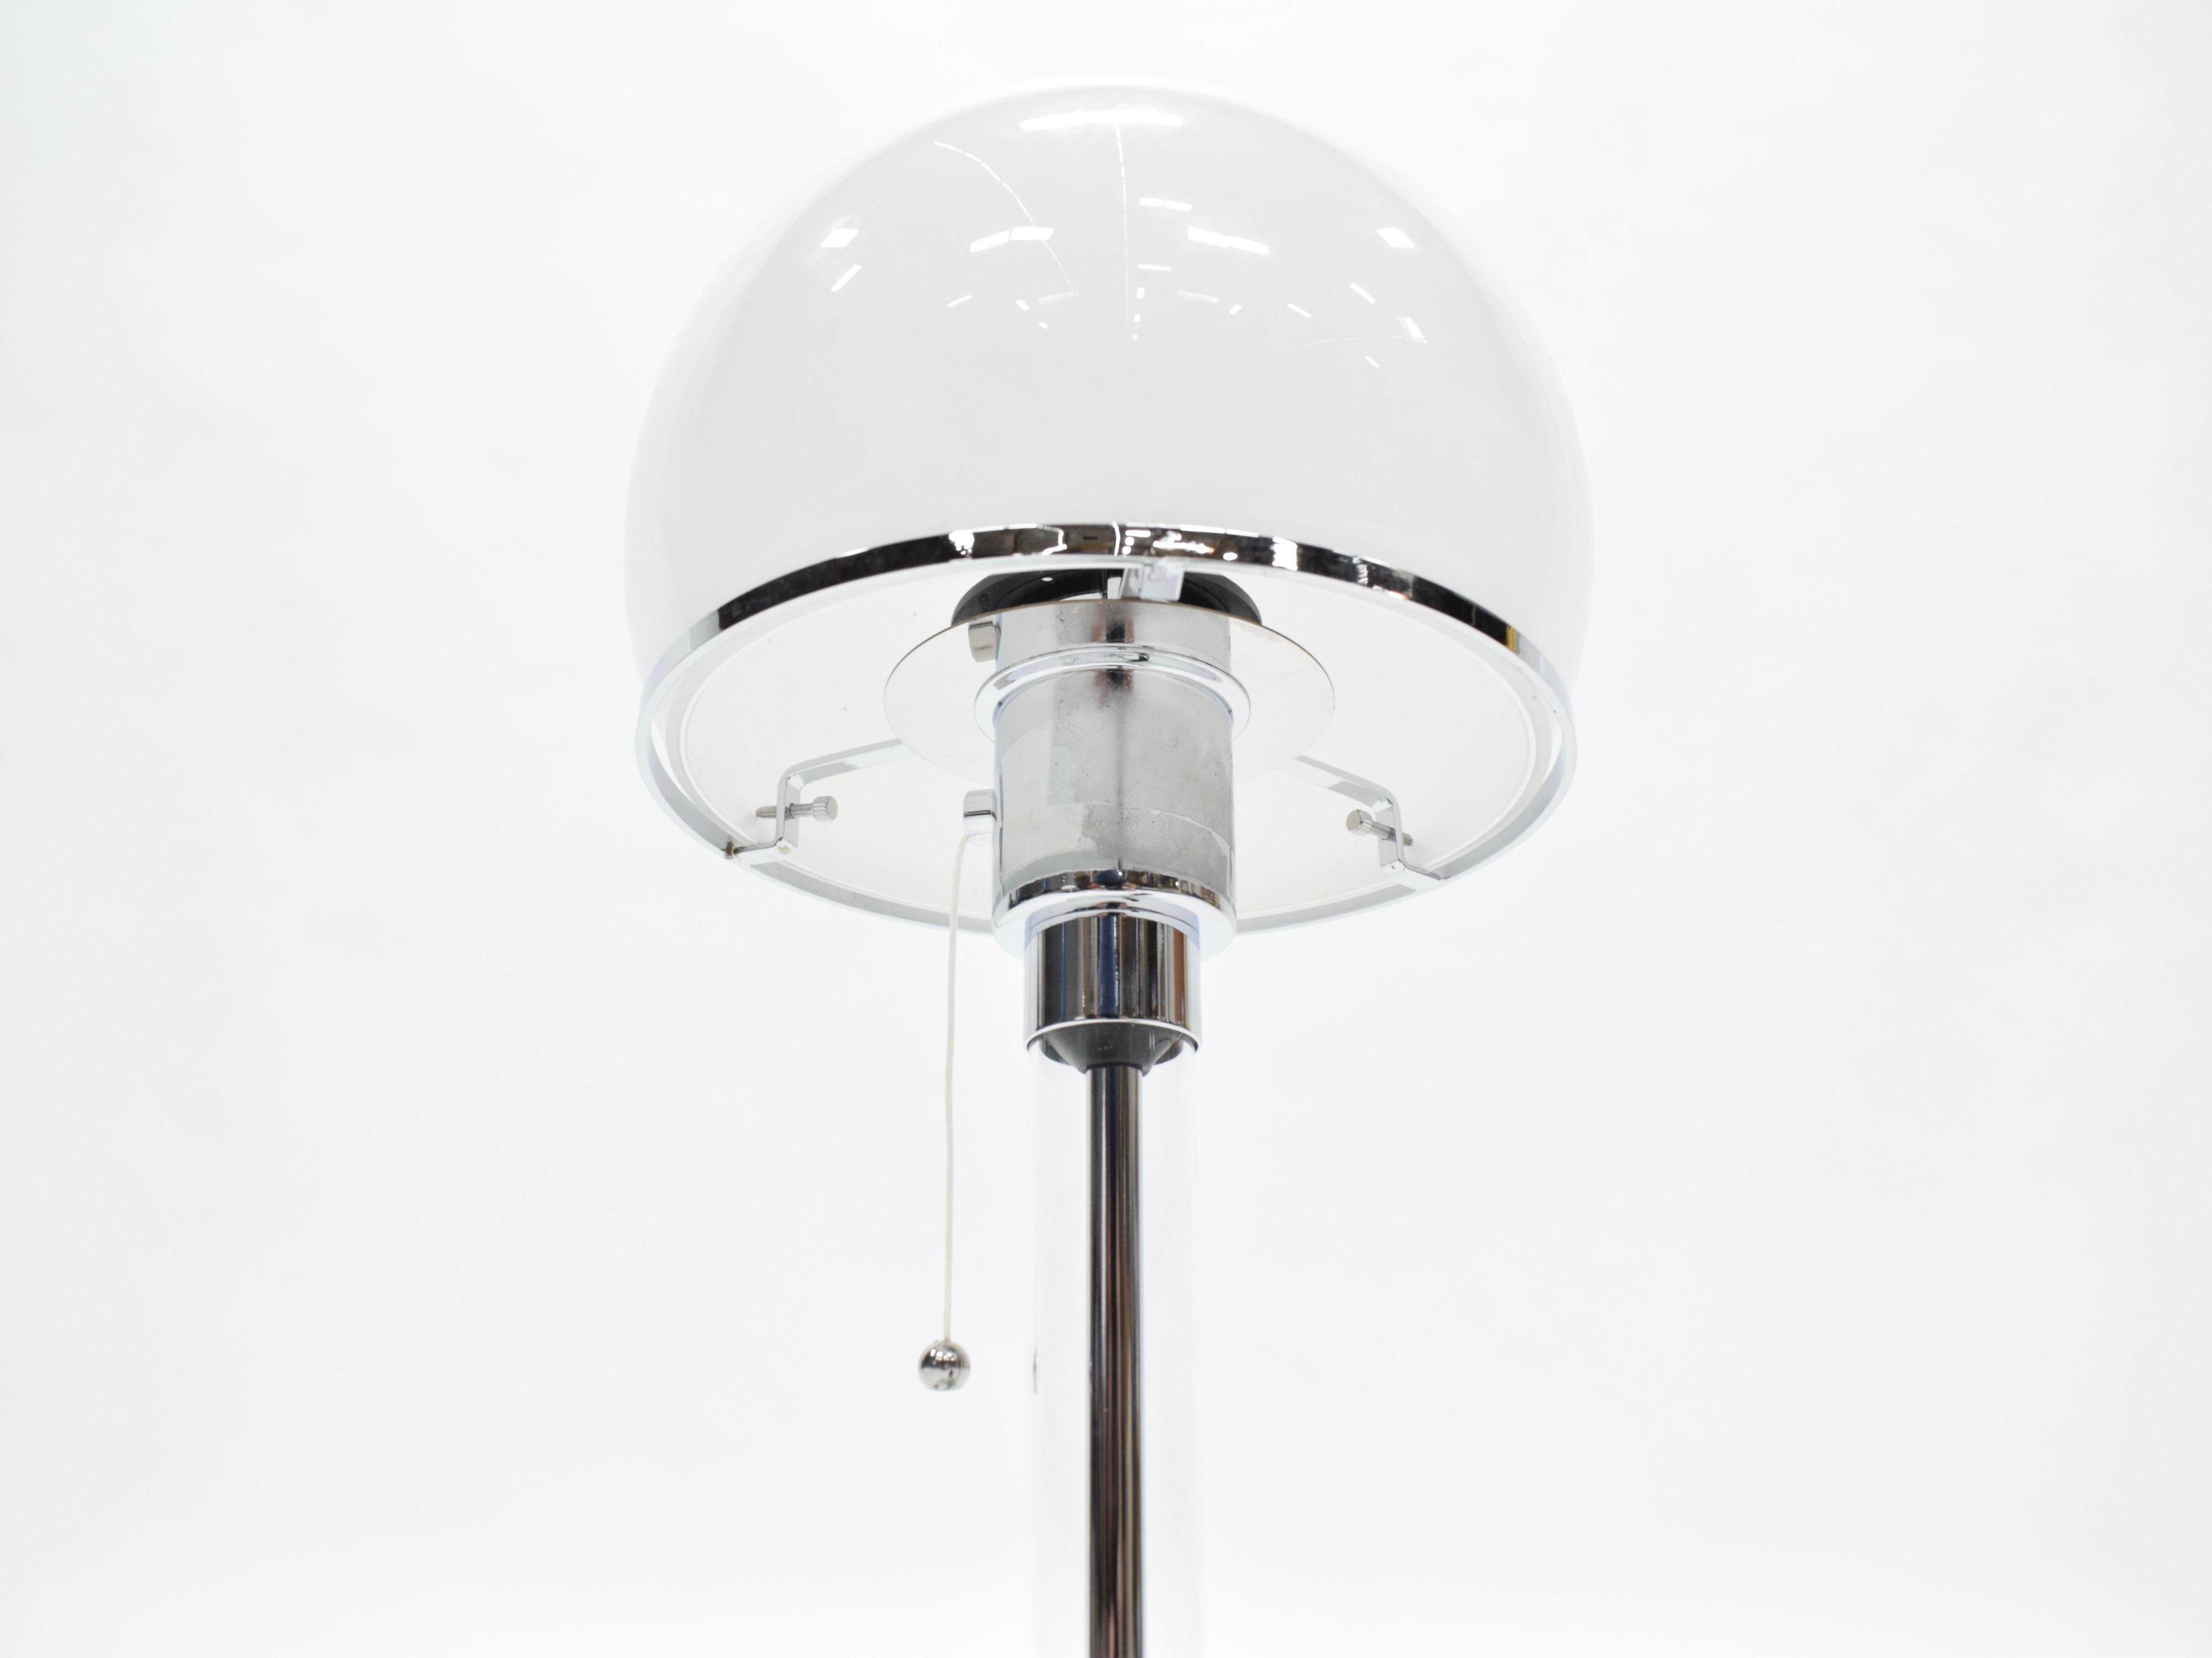 Chrome and glass Bauhaus table lamp by German designer, Wilhelm Wagenfeld, for Tecnolume in the 1920’s. The lamps have been wired for US electrical outlets, and they take regular 75w max Edison bulb.
New production and in very good